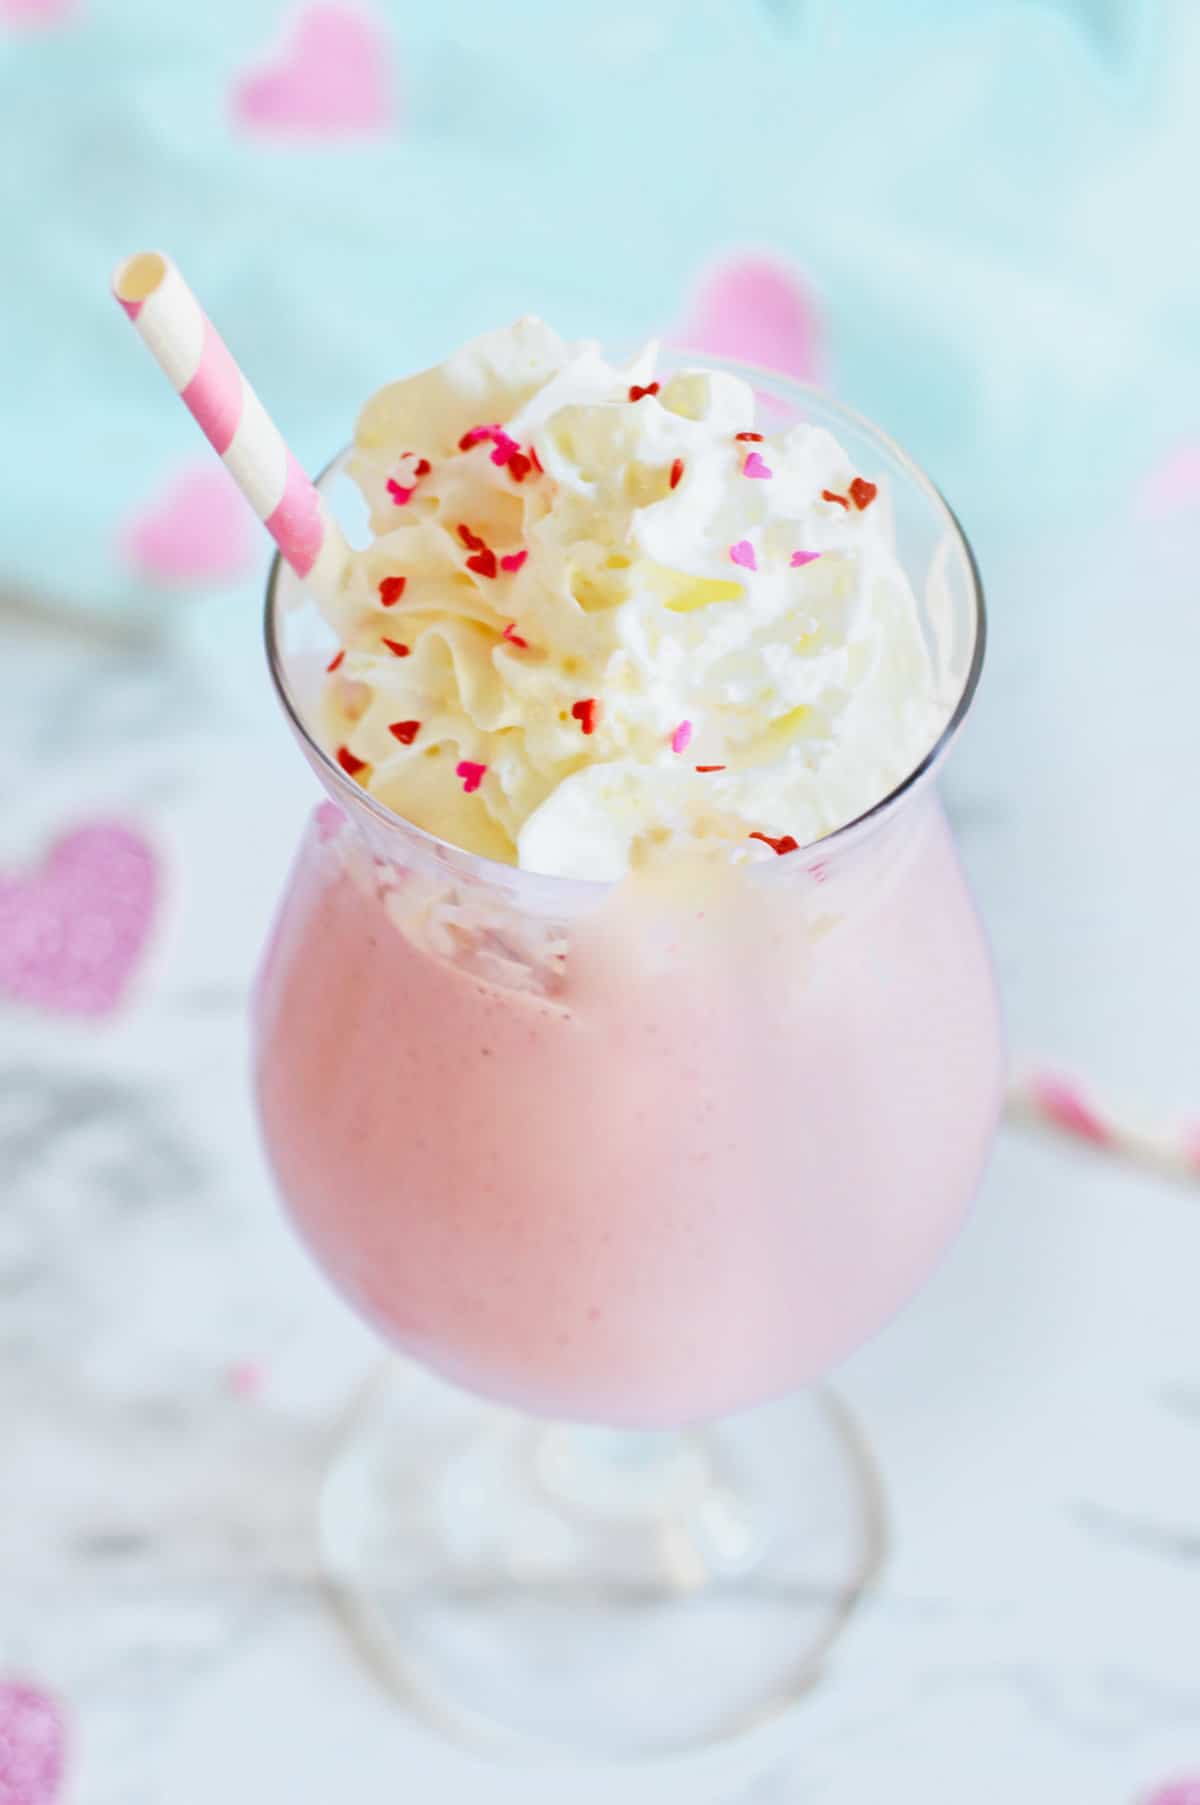 Pink mudslide cocktail with whipped cream and heart shaped sprinkles.